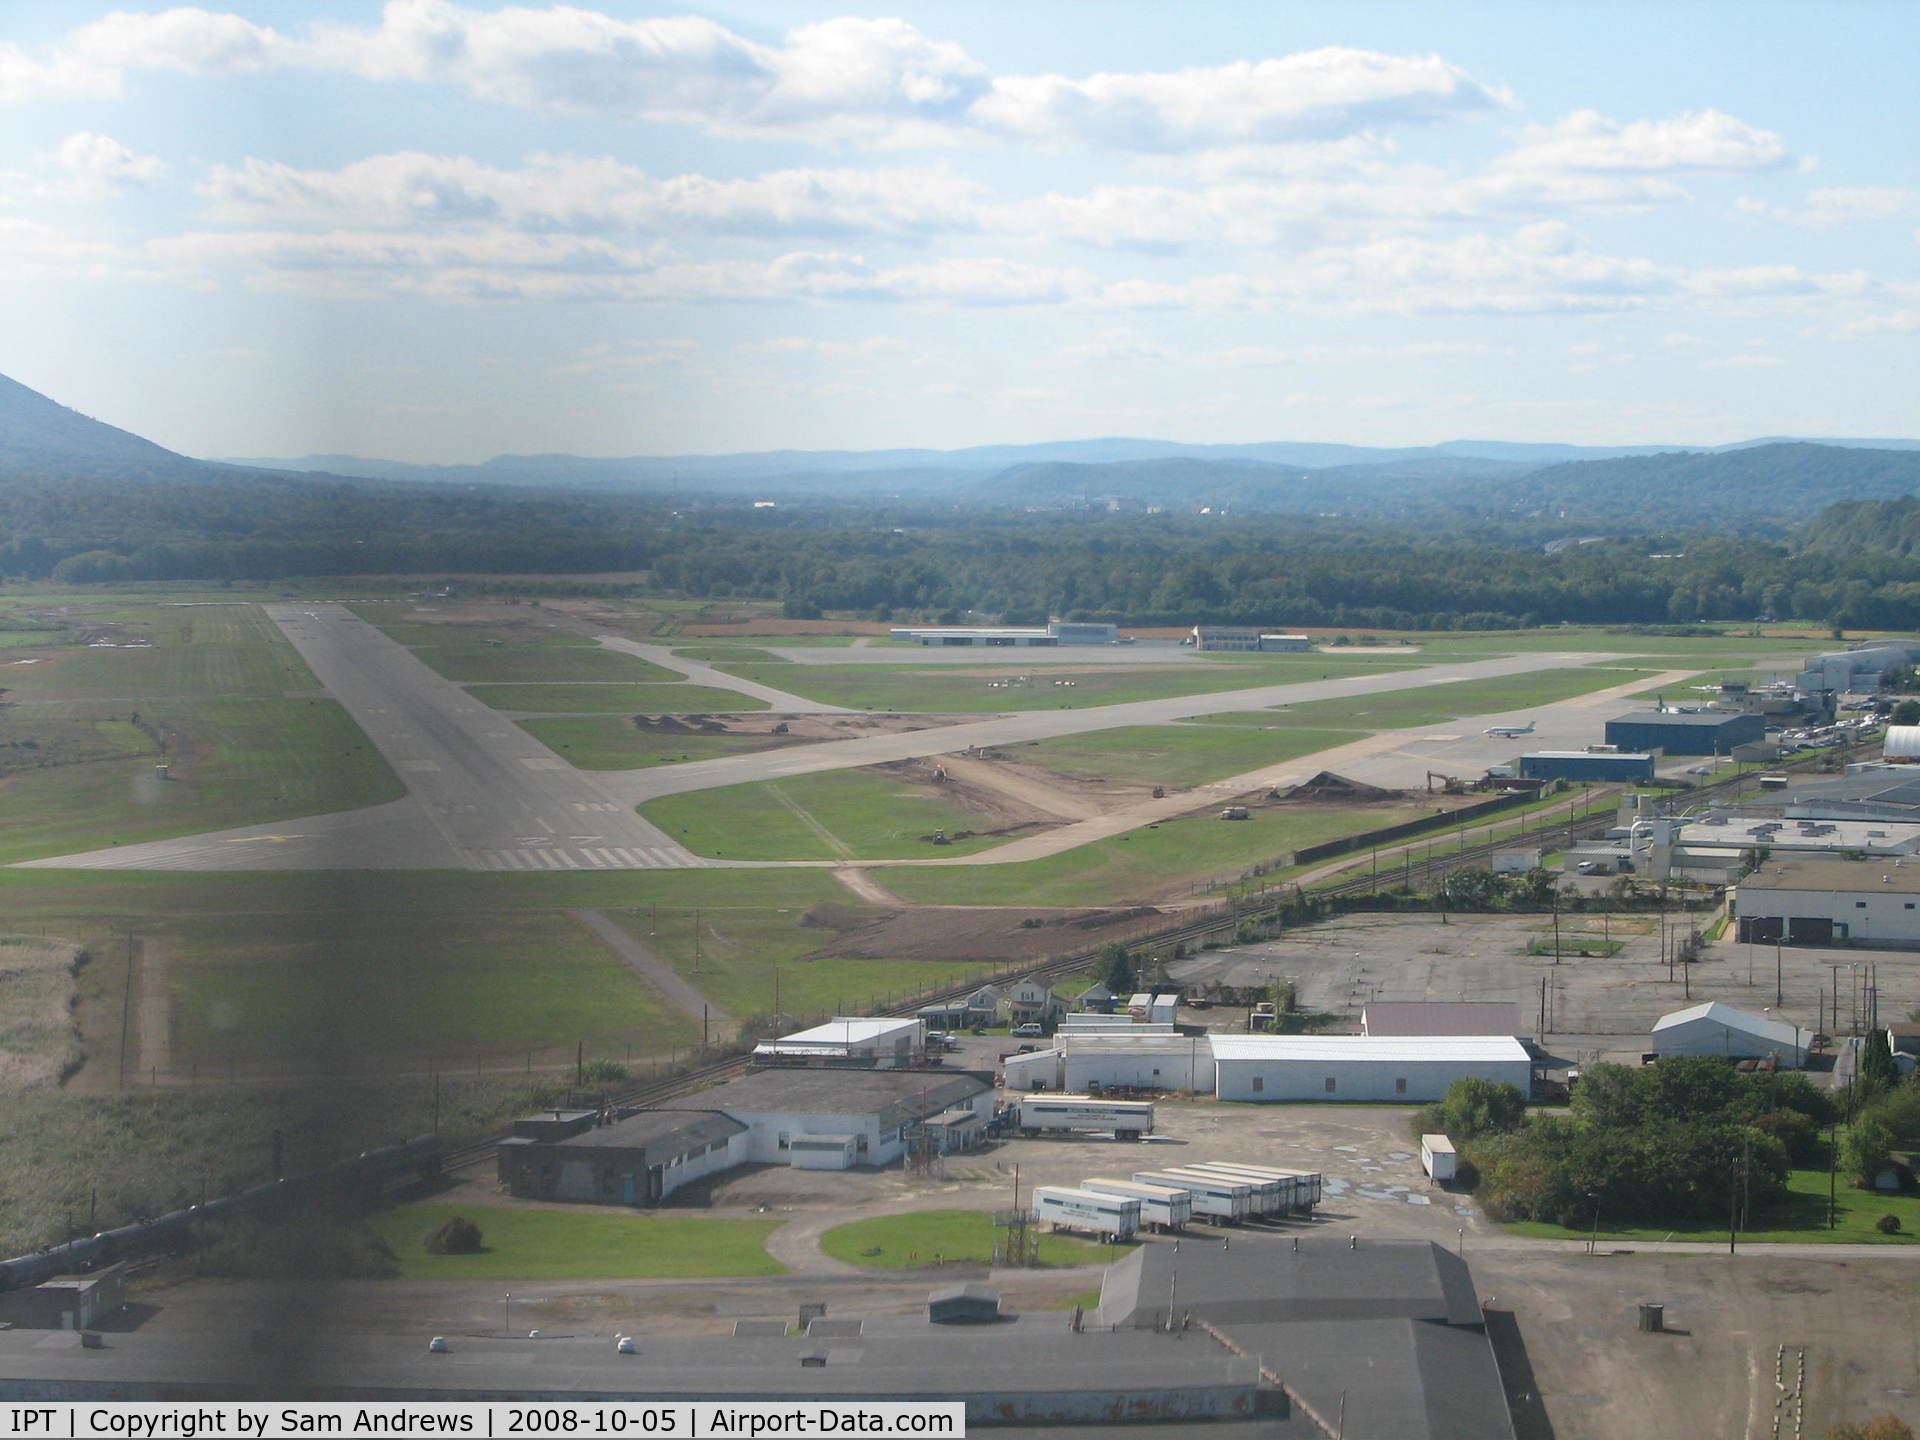 Williamsport Regional Airport (IPT) - Williamsport is getting some airport improvements.  I need to get back up in the air and get a more recent pic.